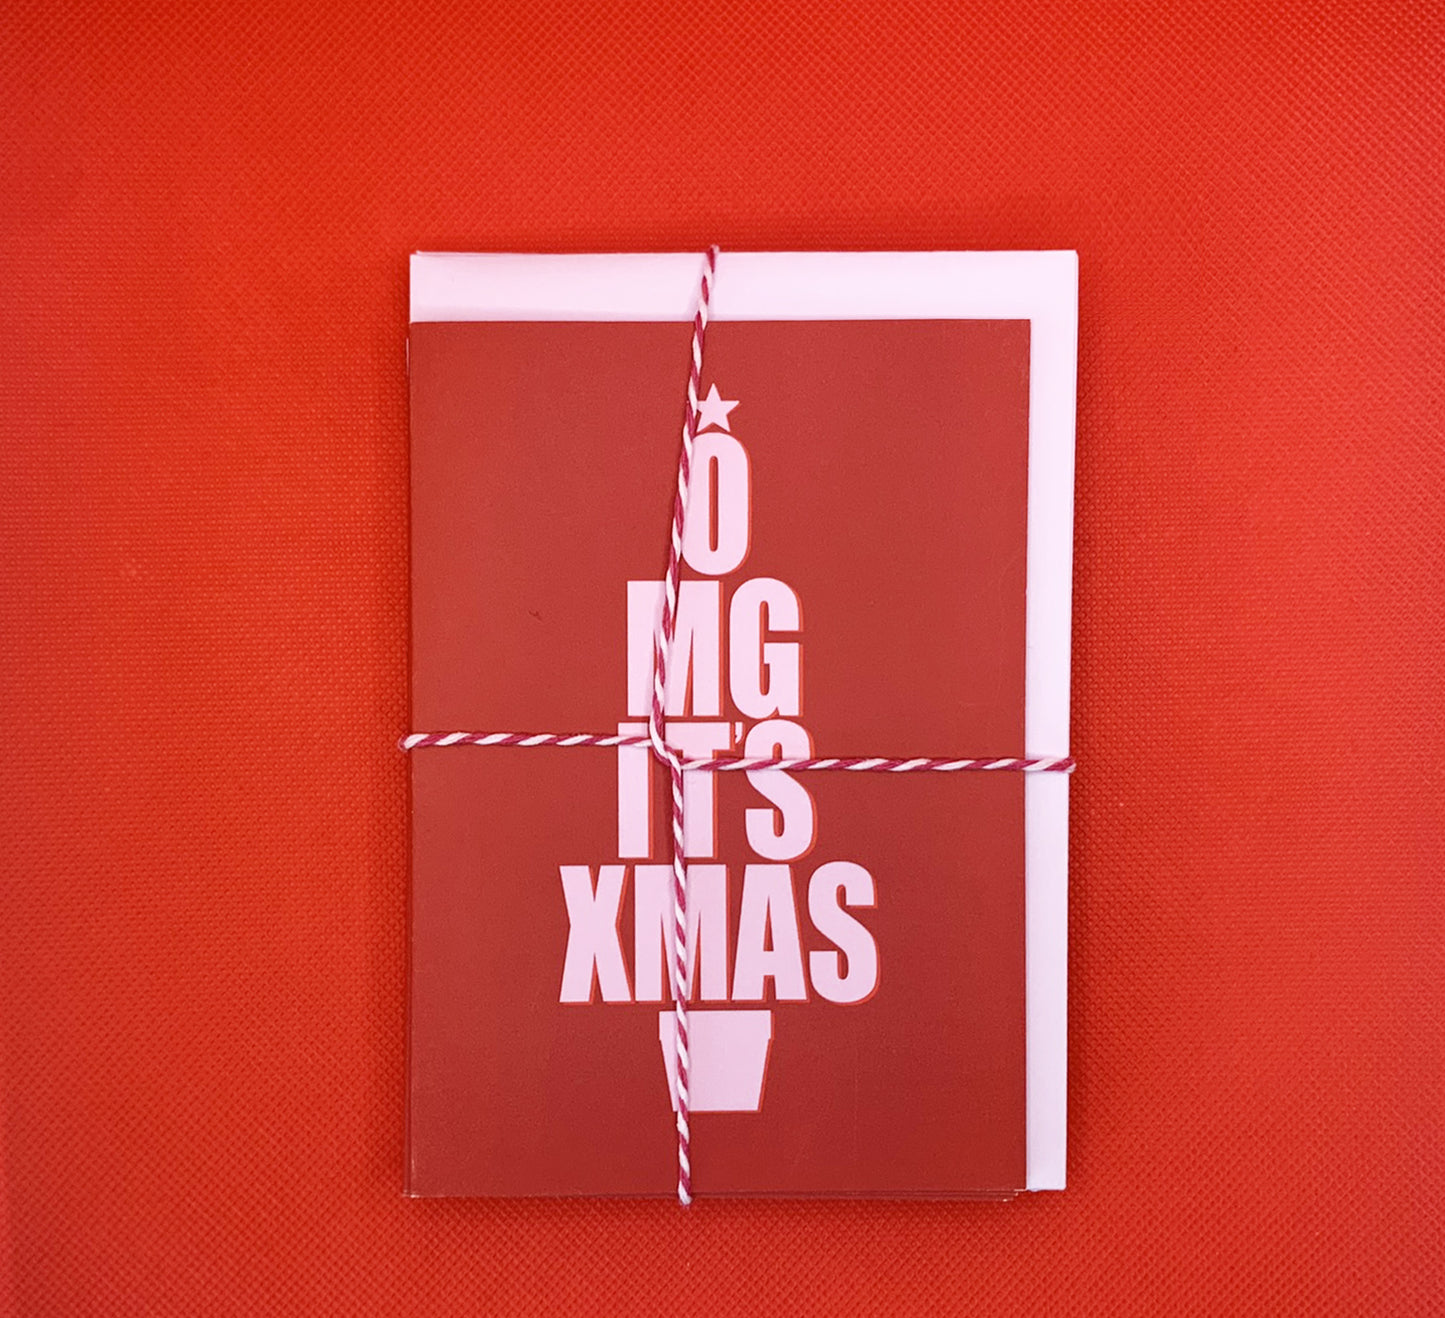 OMG It's Xmas - Christmas Cards - pack of six